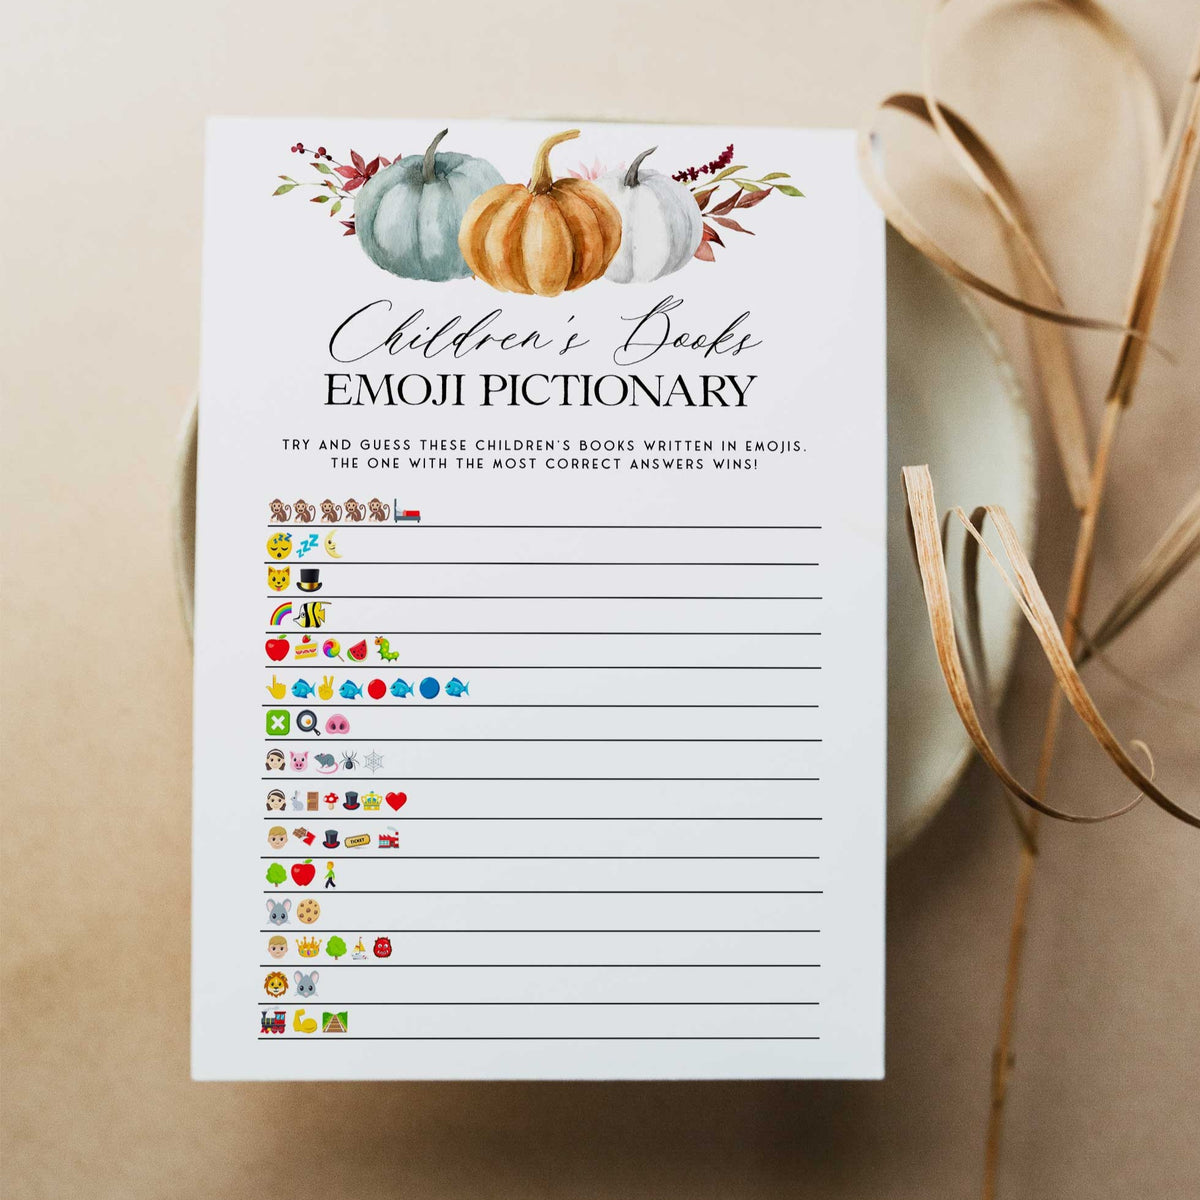 Fully editable and printable baby shower childrnes books emoji pictionary game with a fall pumpkin design. Perfect for a Fall Pumpkin baby shower themed party